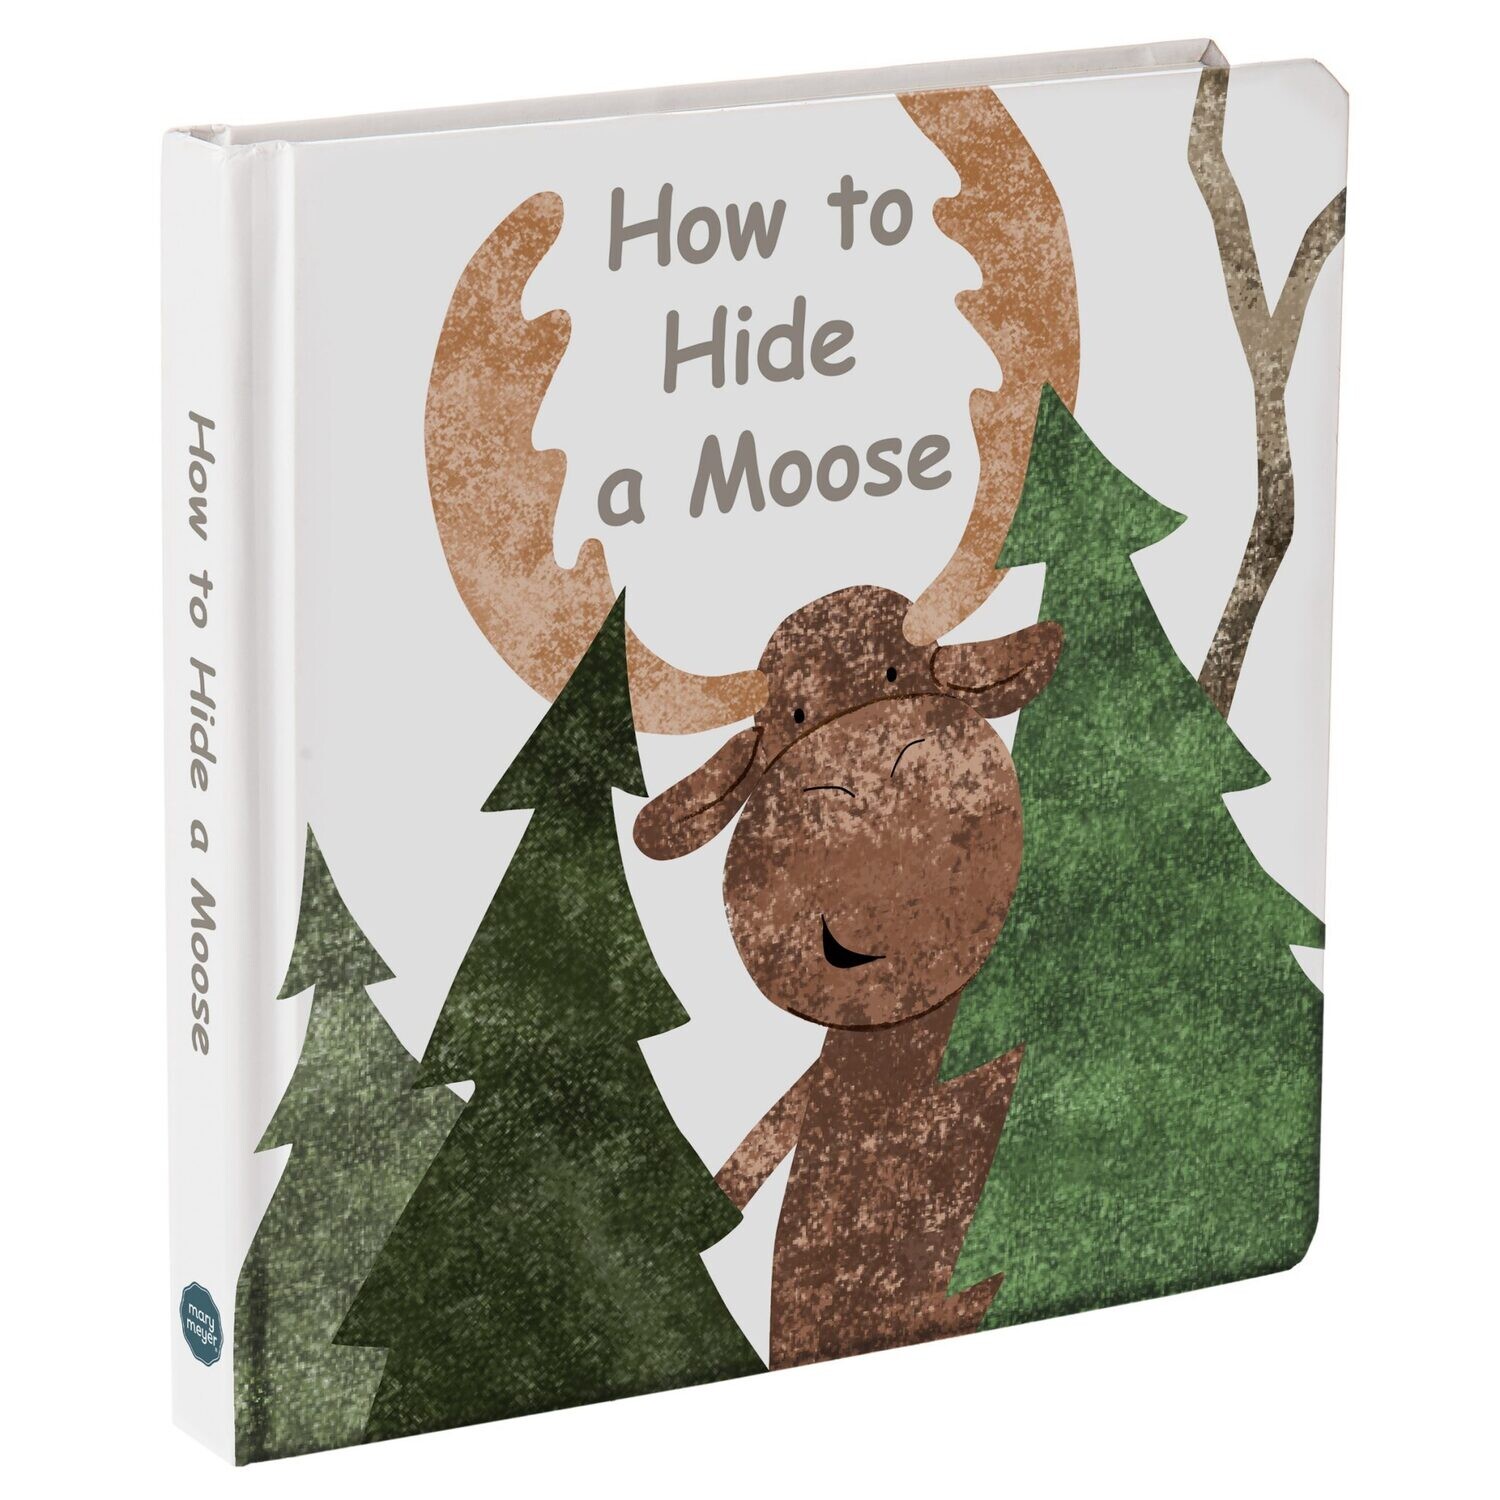 How to Hide a Moose